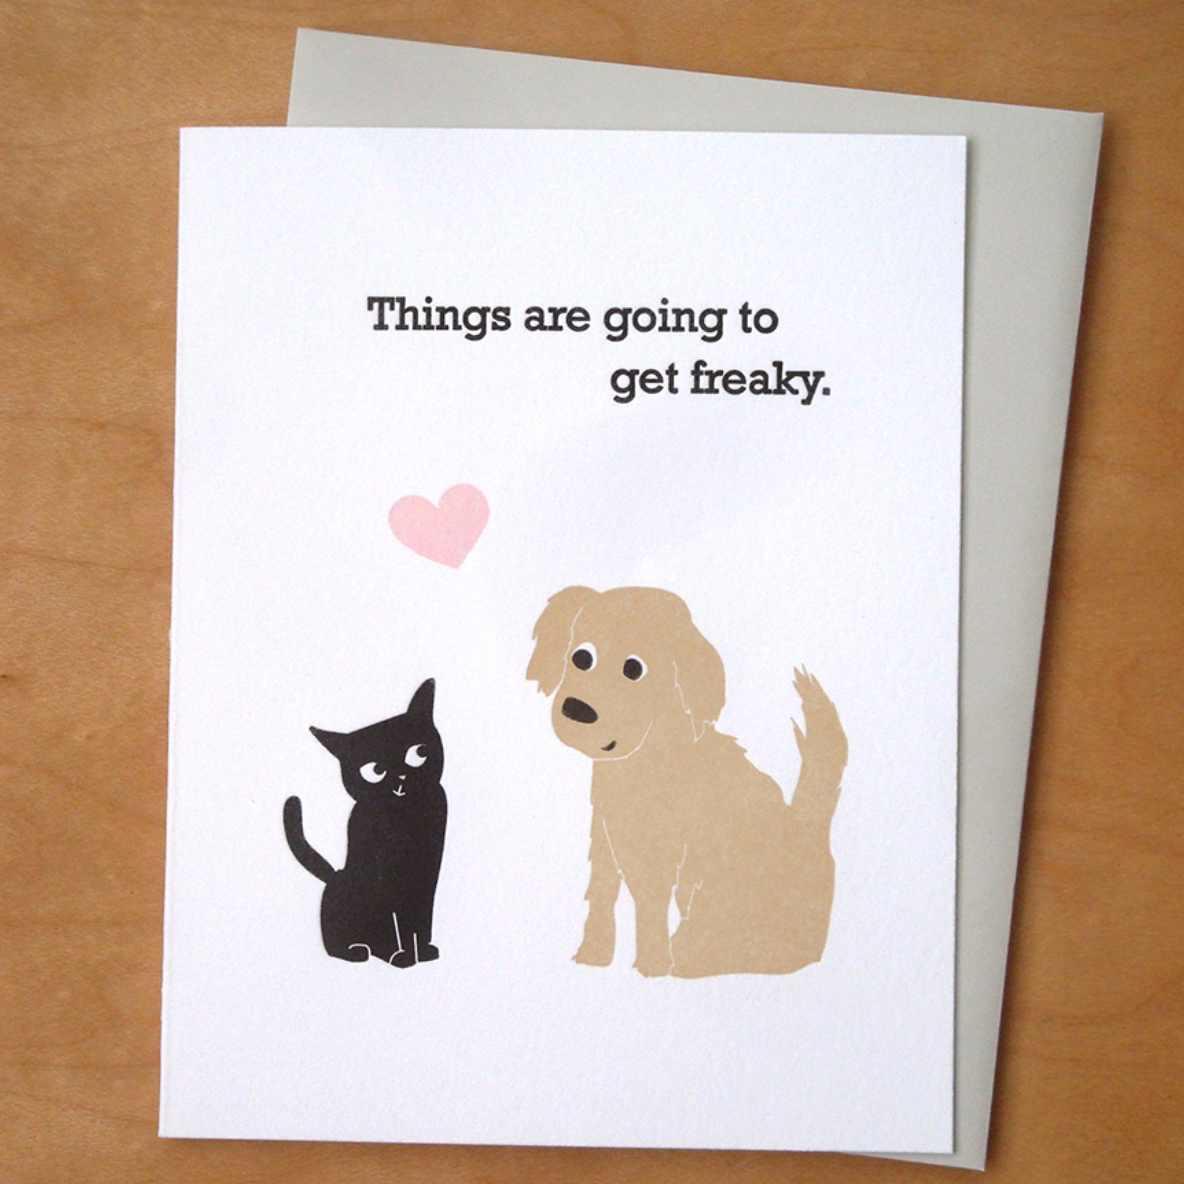 "Things are going to get freaky" - Greeting Card